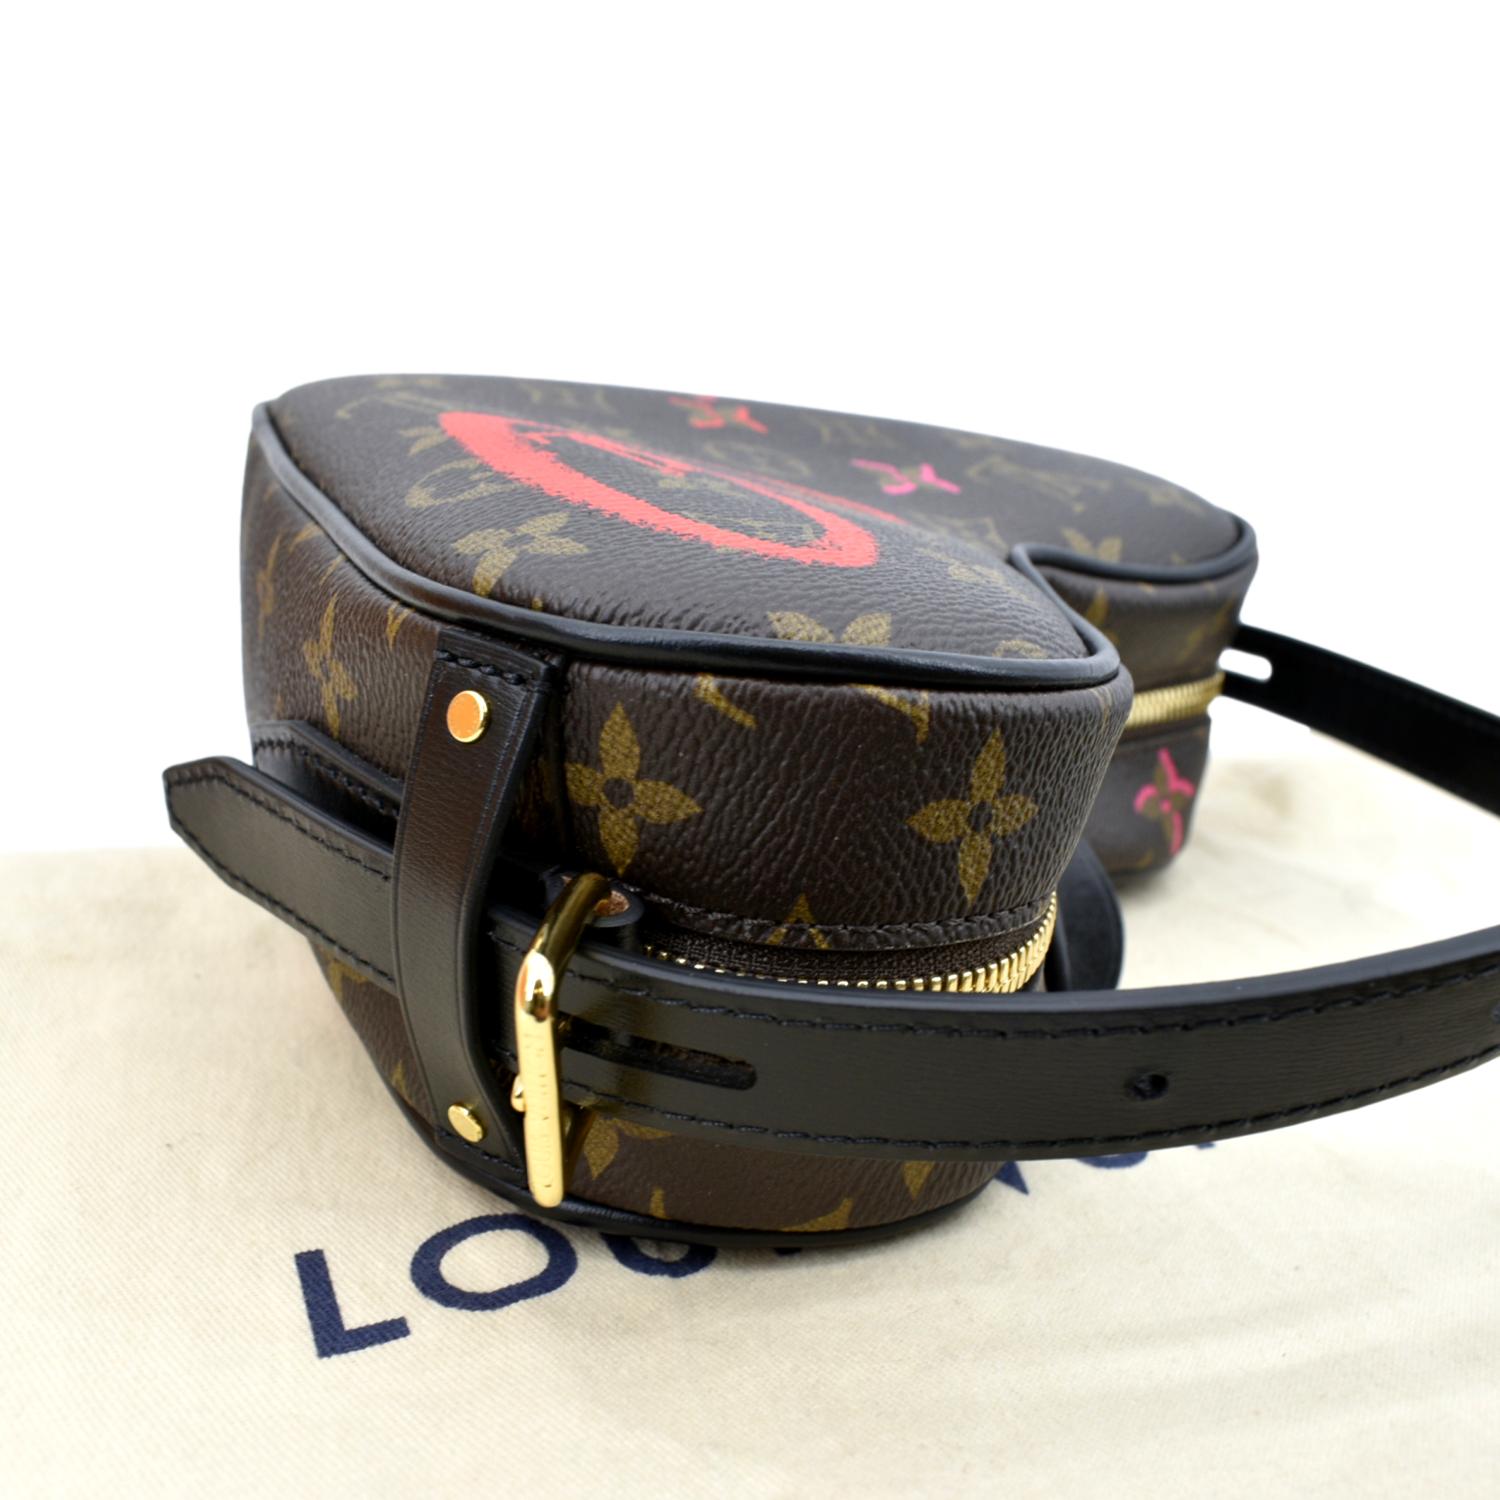 Coeur game on leather crossbody bag Louis Vuitton Brown in Leather